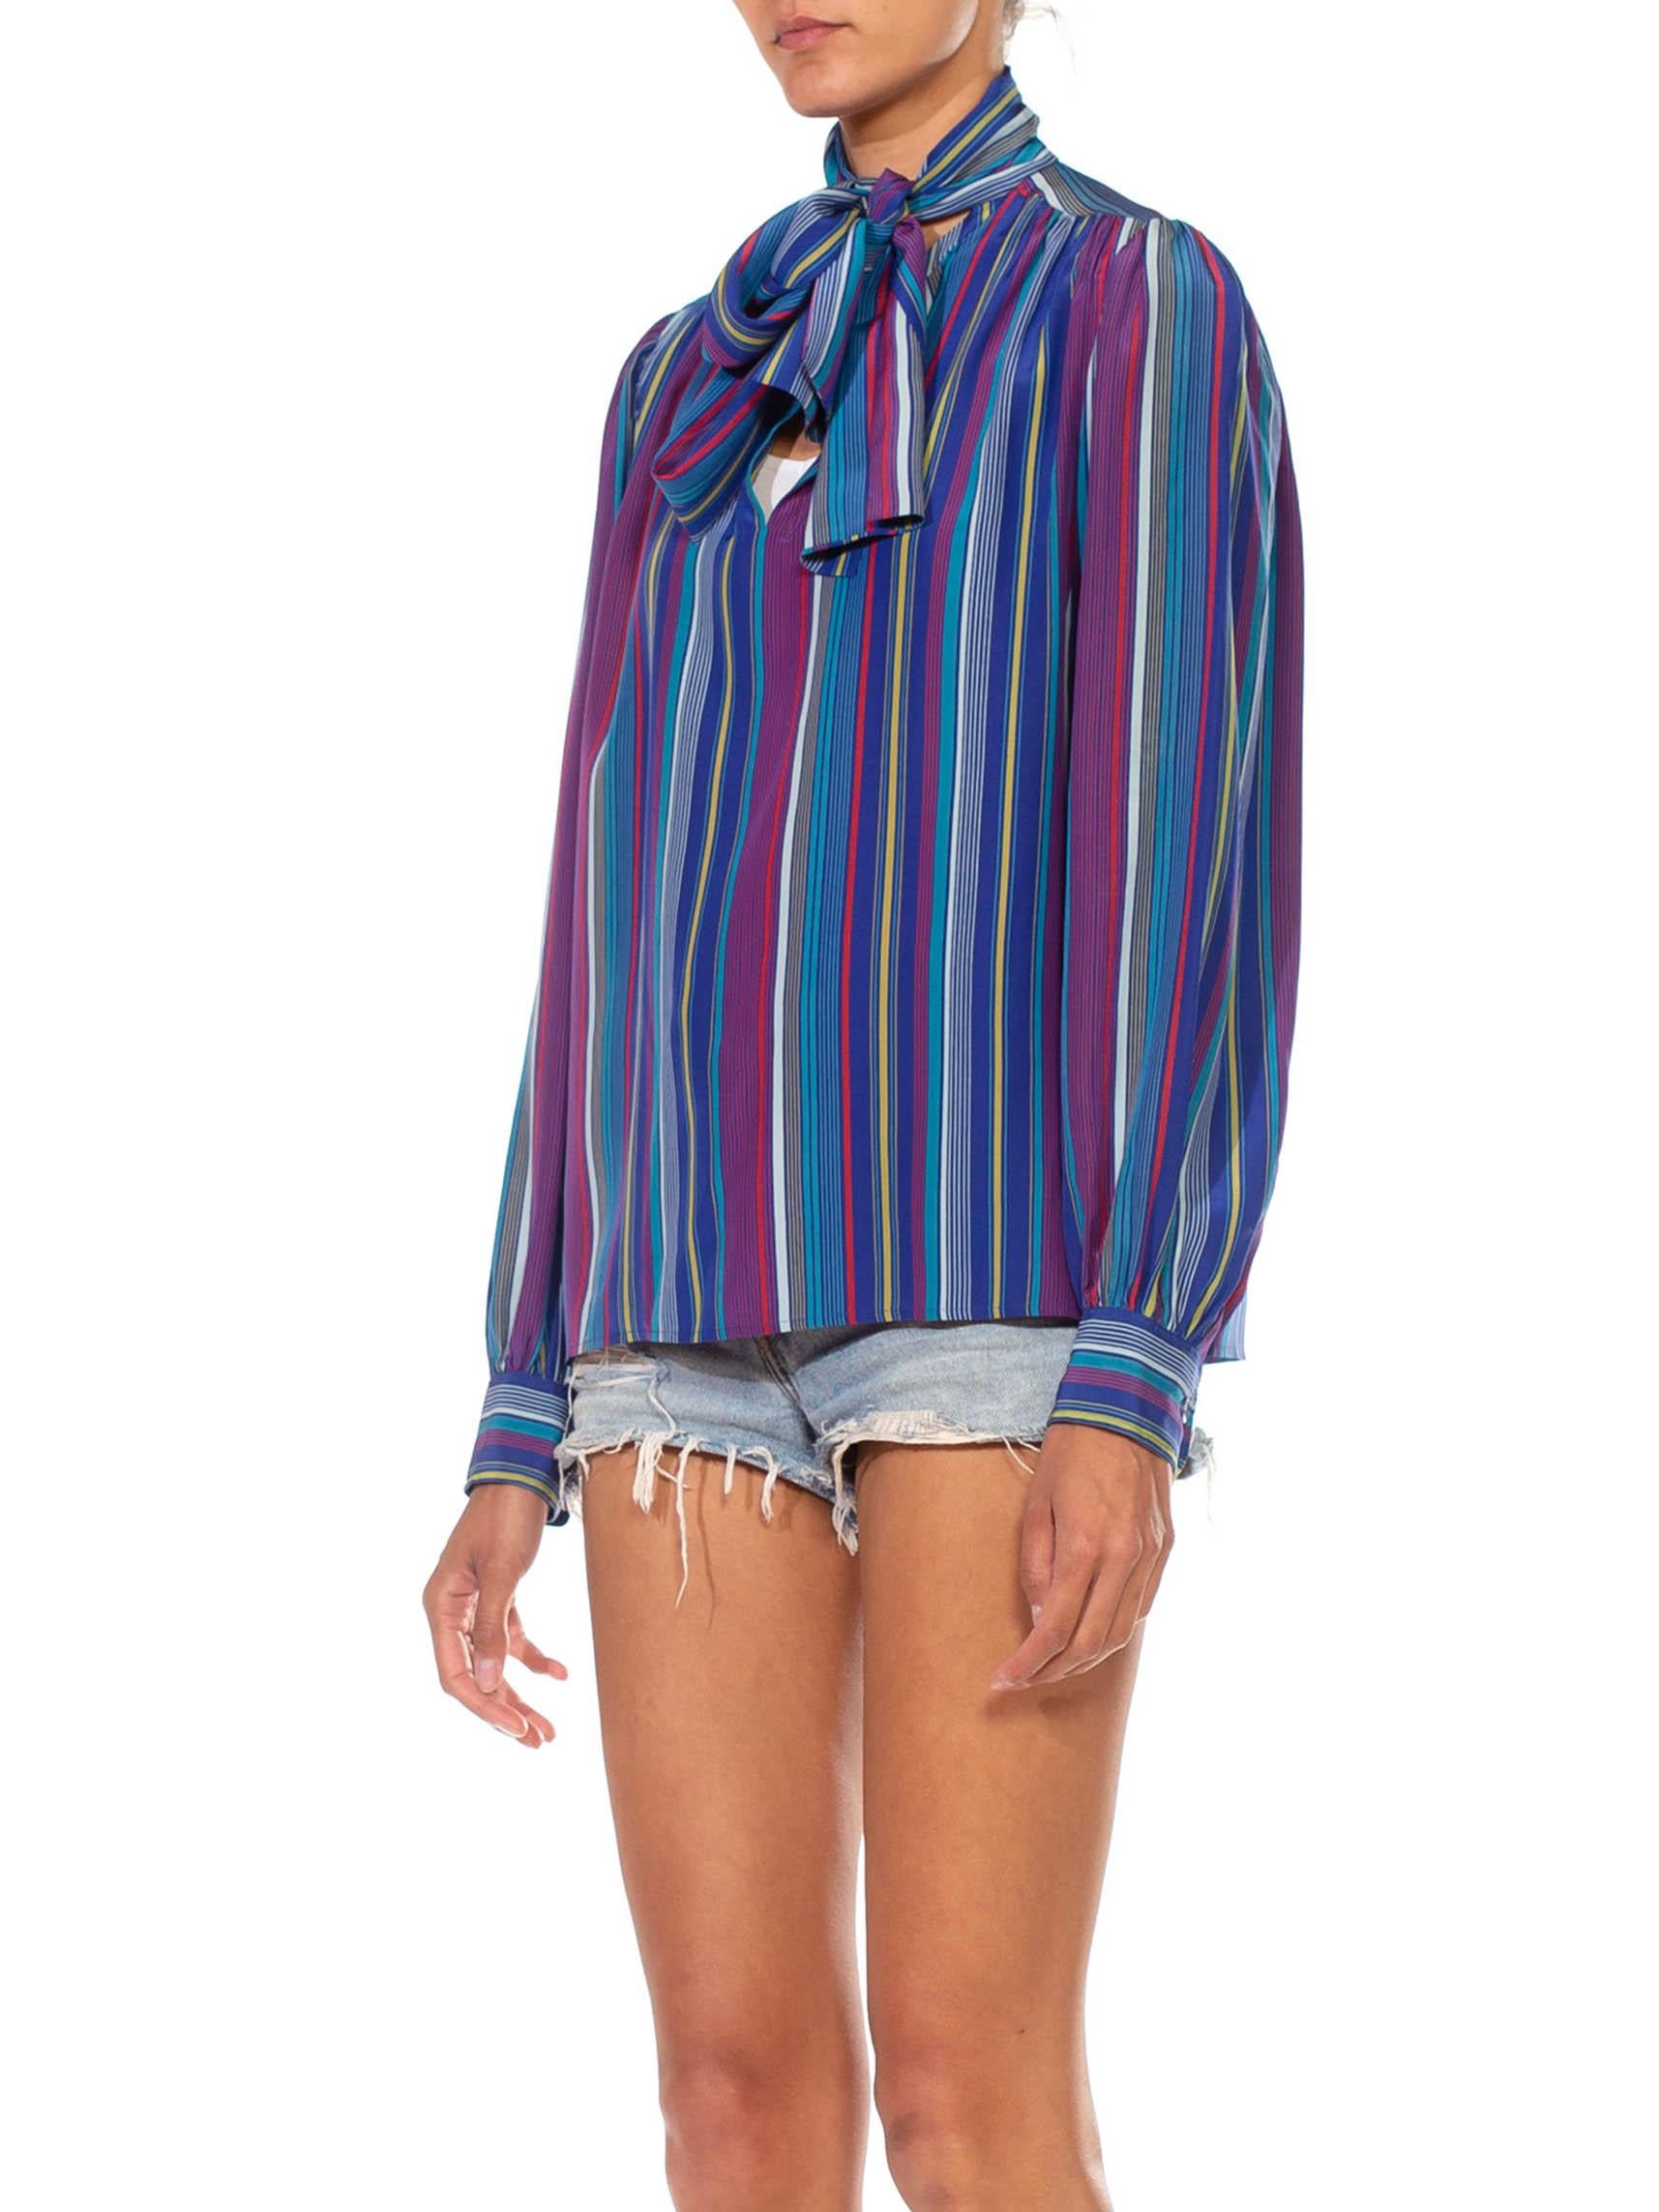 Women's 1990S YVES SAINT LAURENT RIVE GUACHE Blue & Red Silk Striped Pussybow Blouse